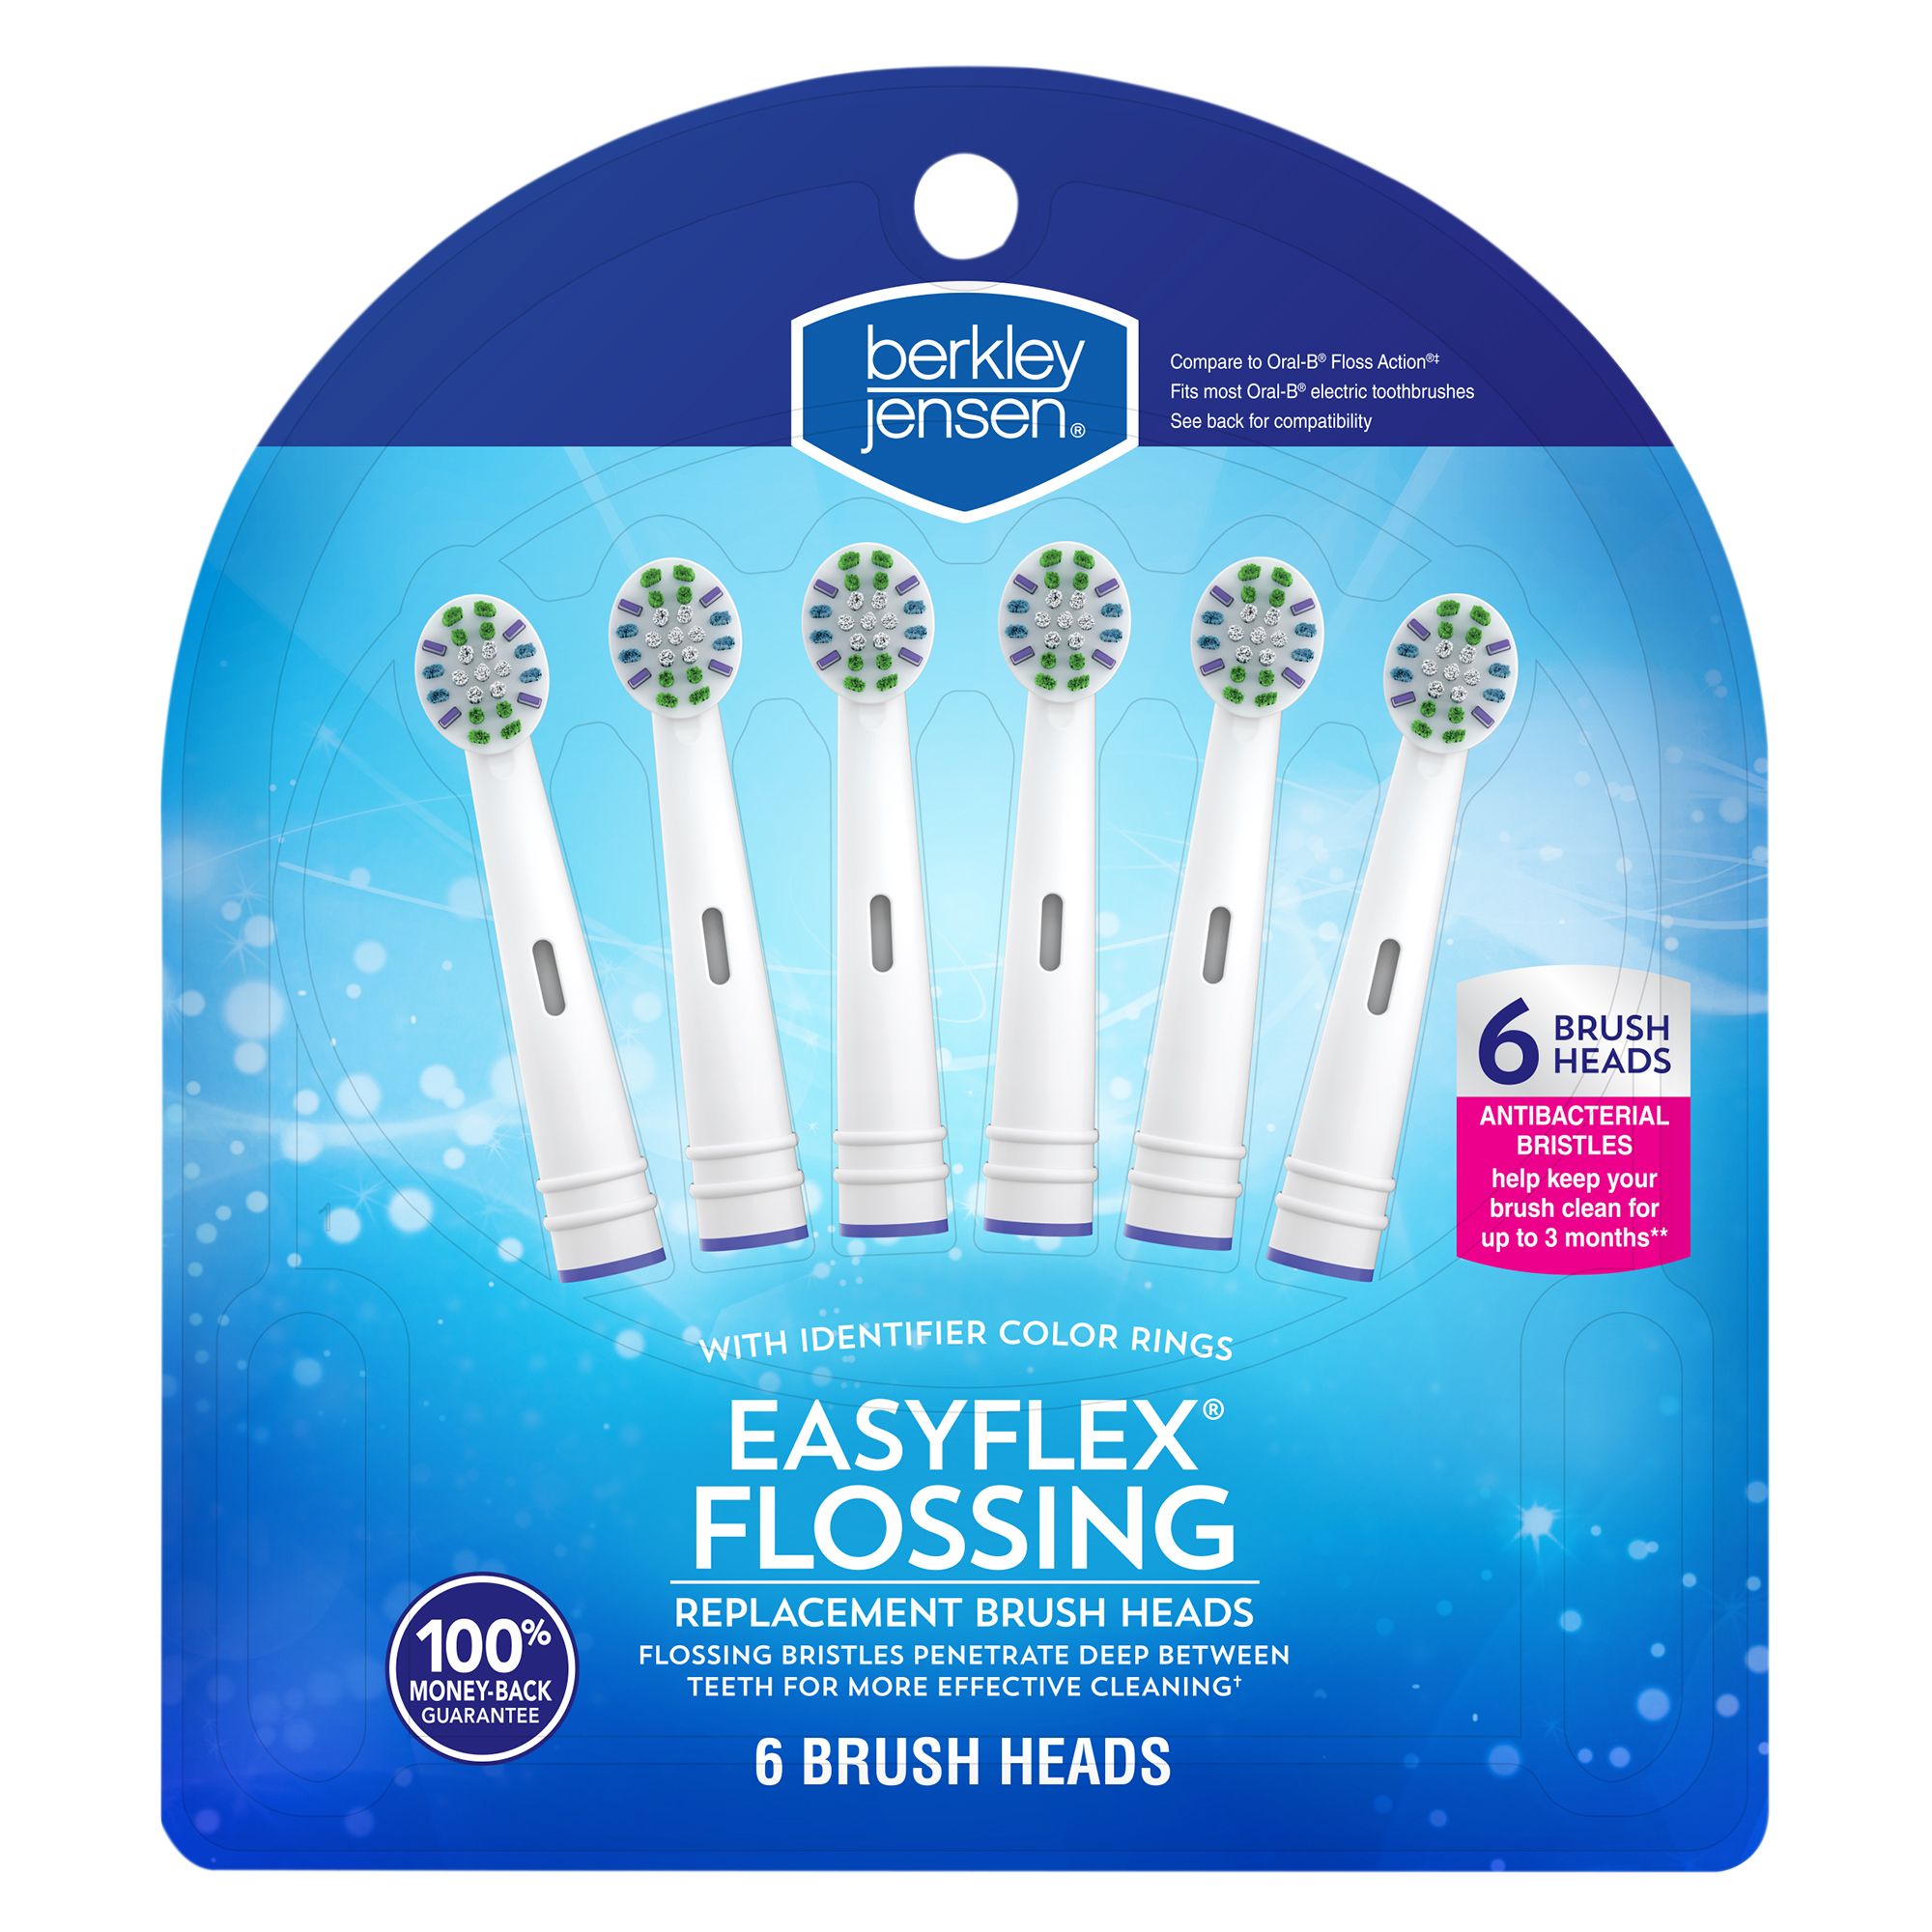 Oral-B Electric Toothbrushes for sale in Kirkland, Washington